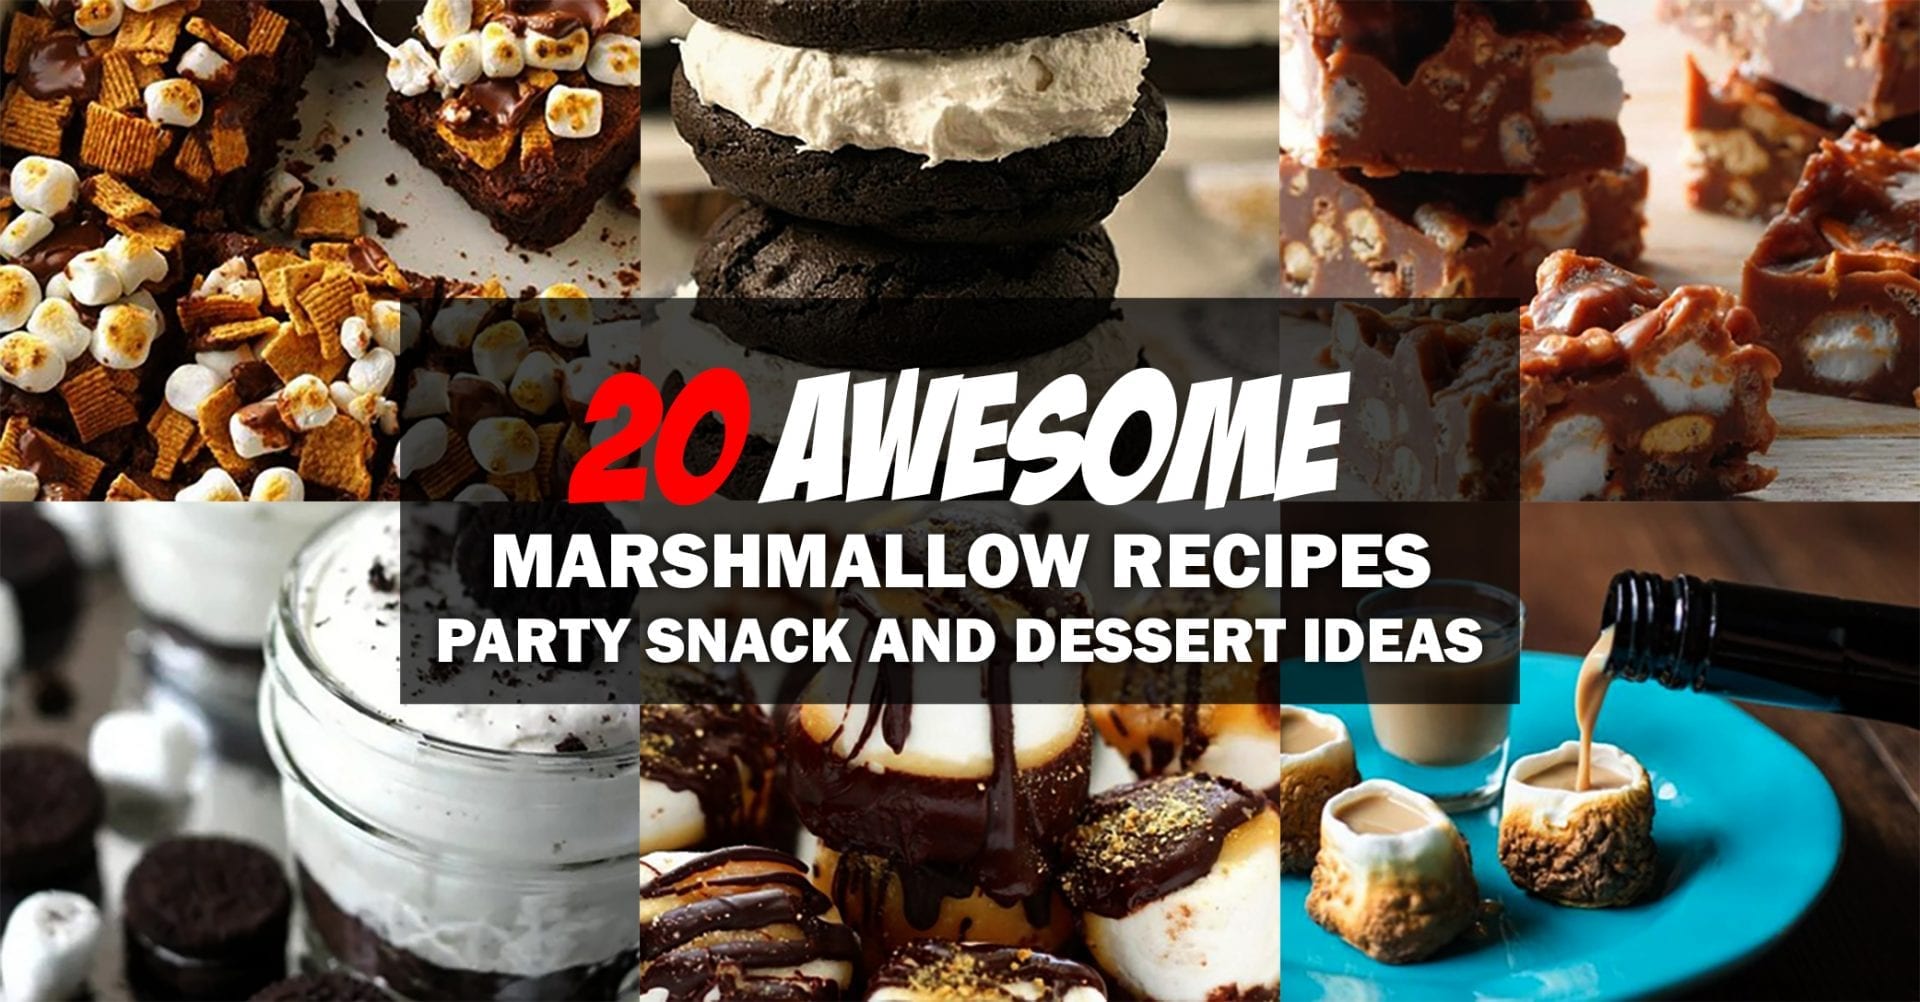 20 Awesome Marshmallow Recipes Party Snack And Dessert Ideas